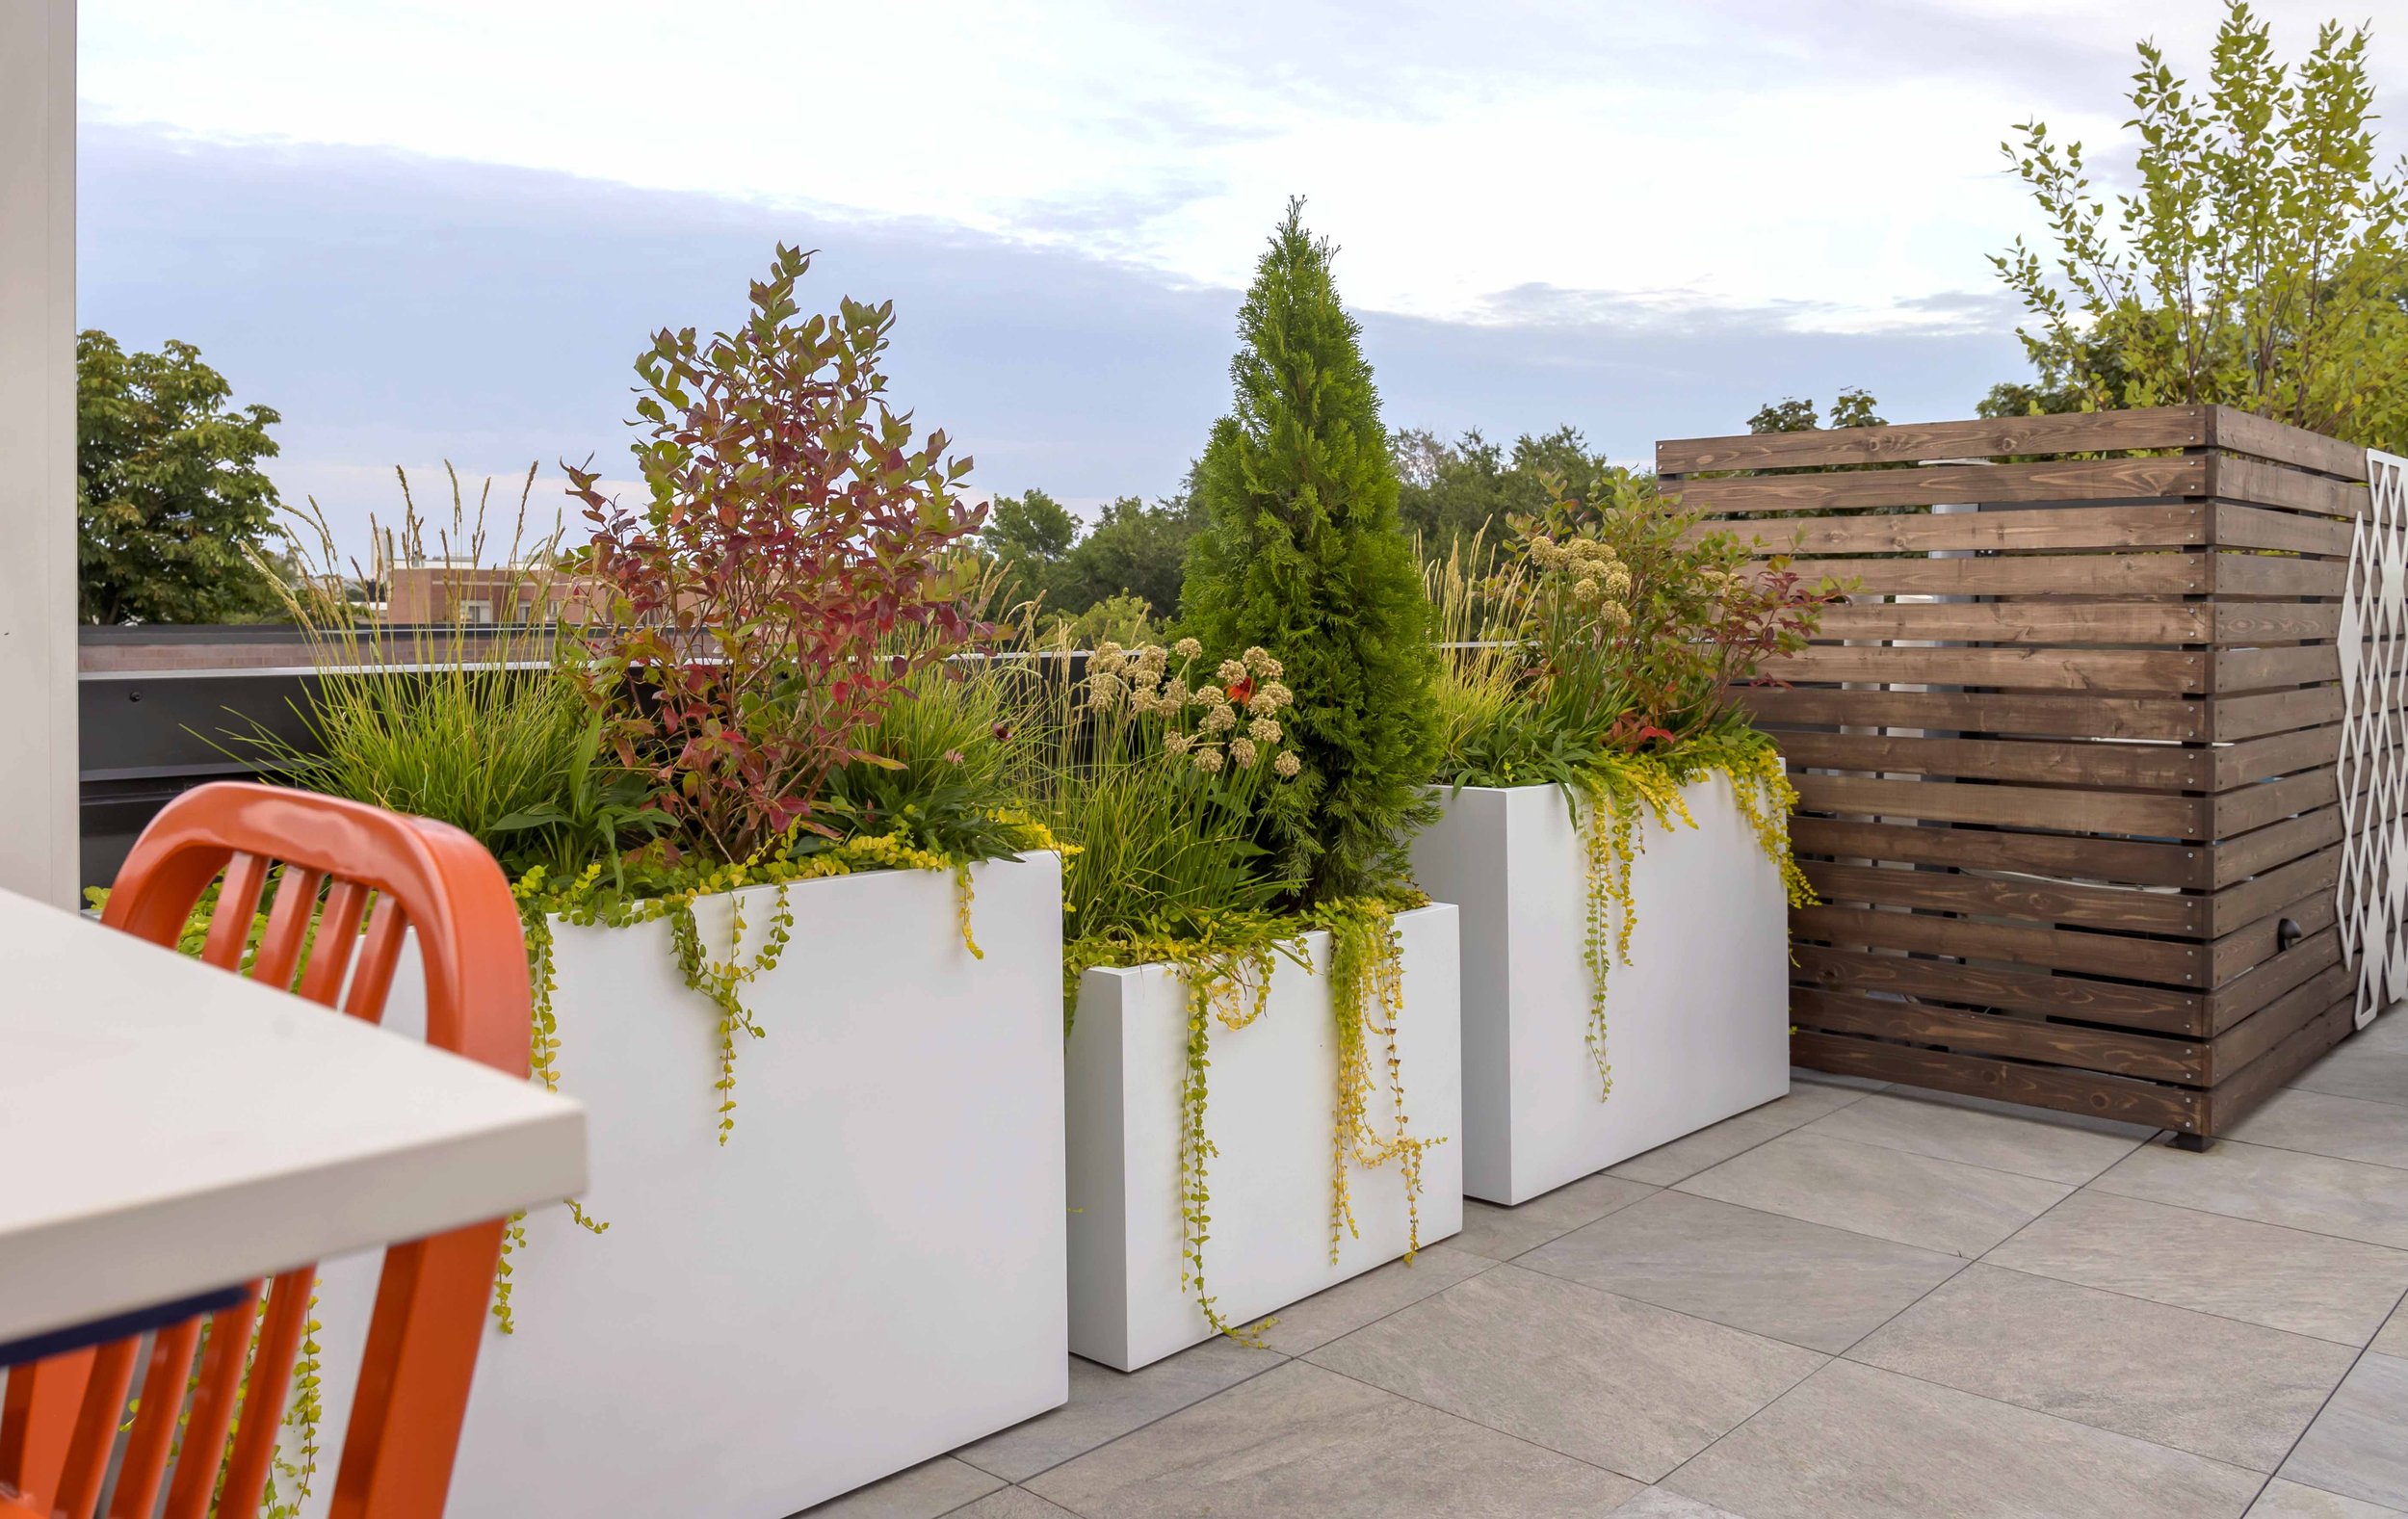 Rooftopia-chicago-lakeview-rooftop-planter-boxes-perennials-deck-garden.jpg